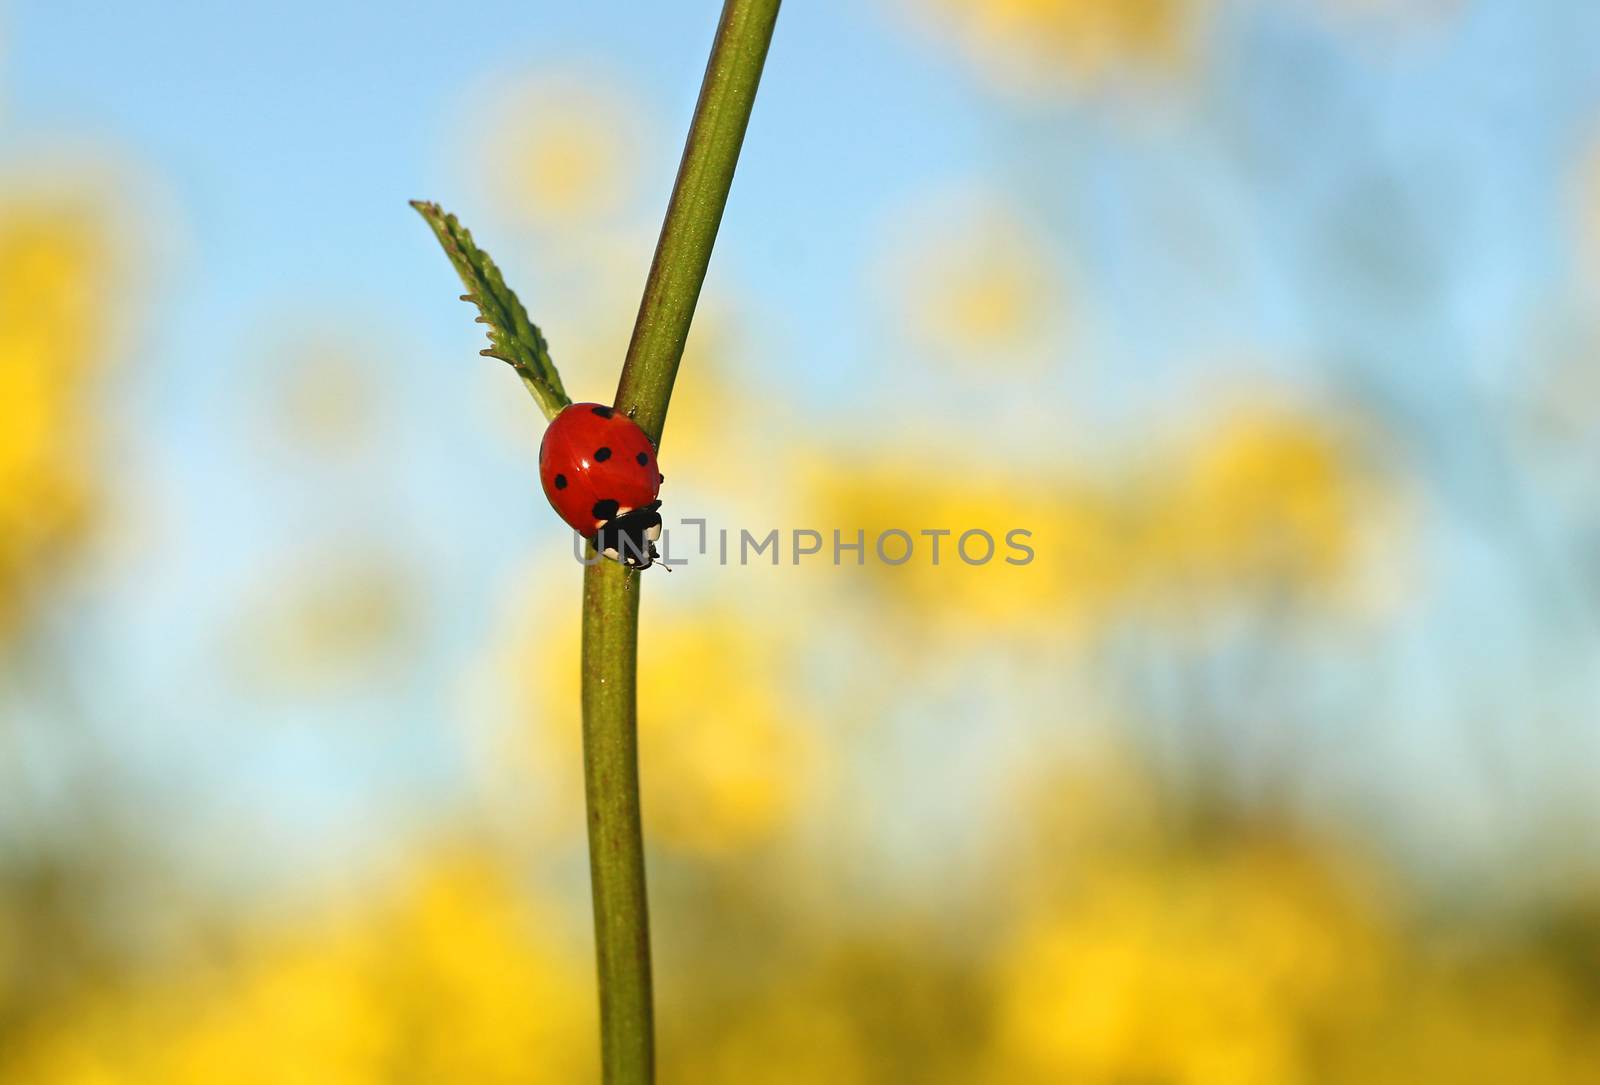 Red ladybug on flower stem in the field